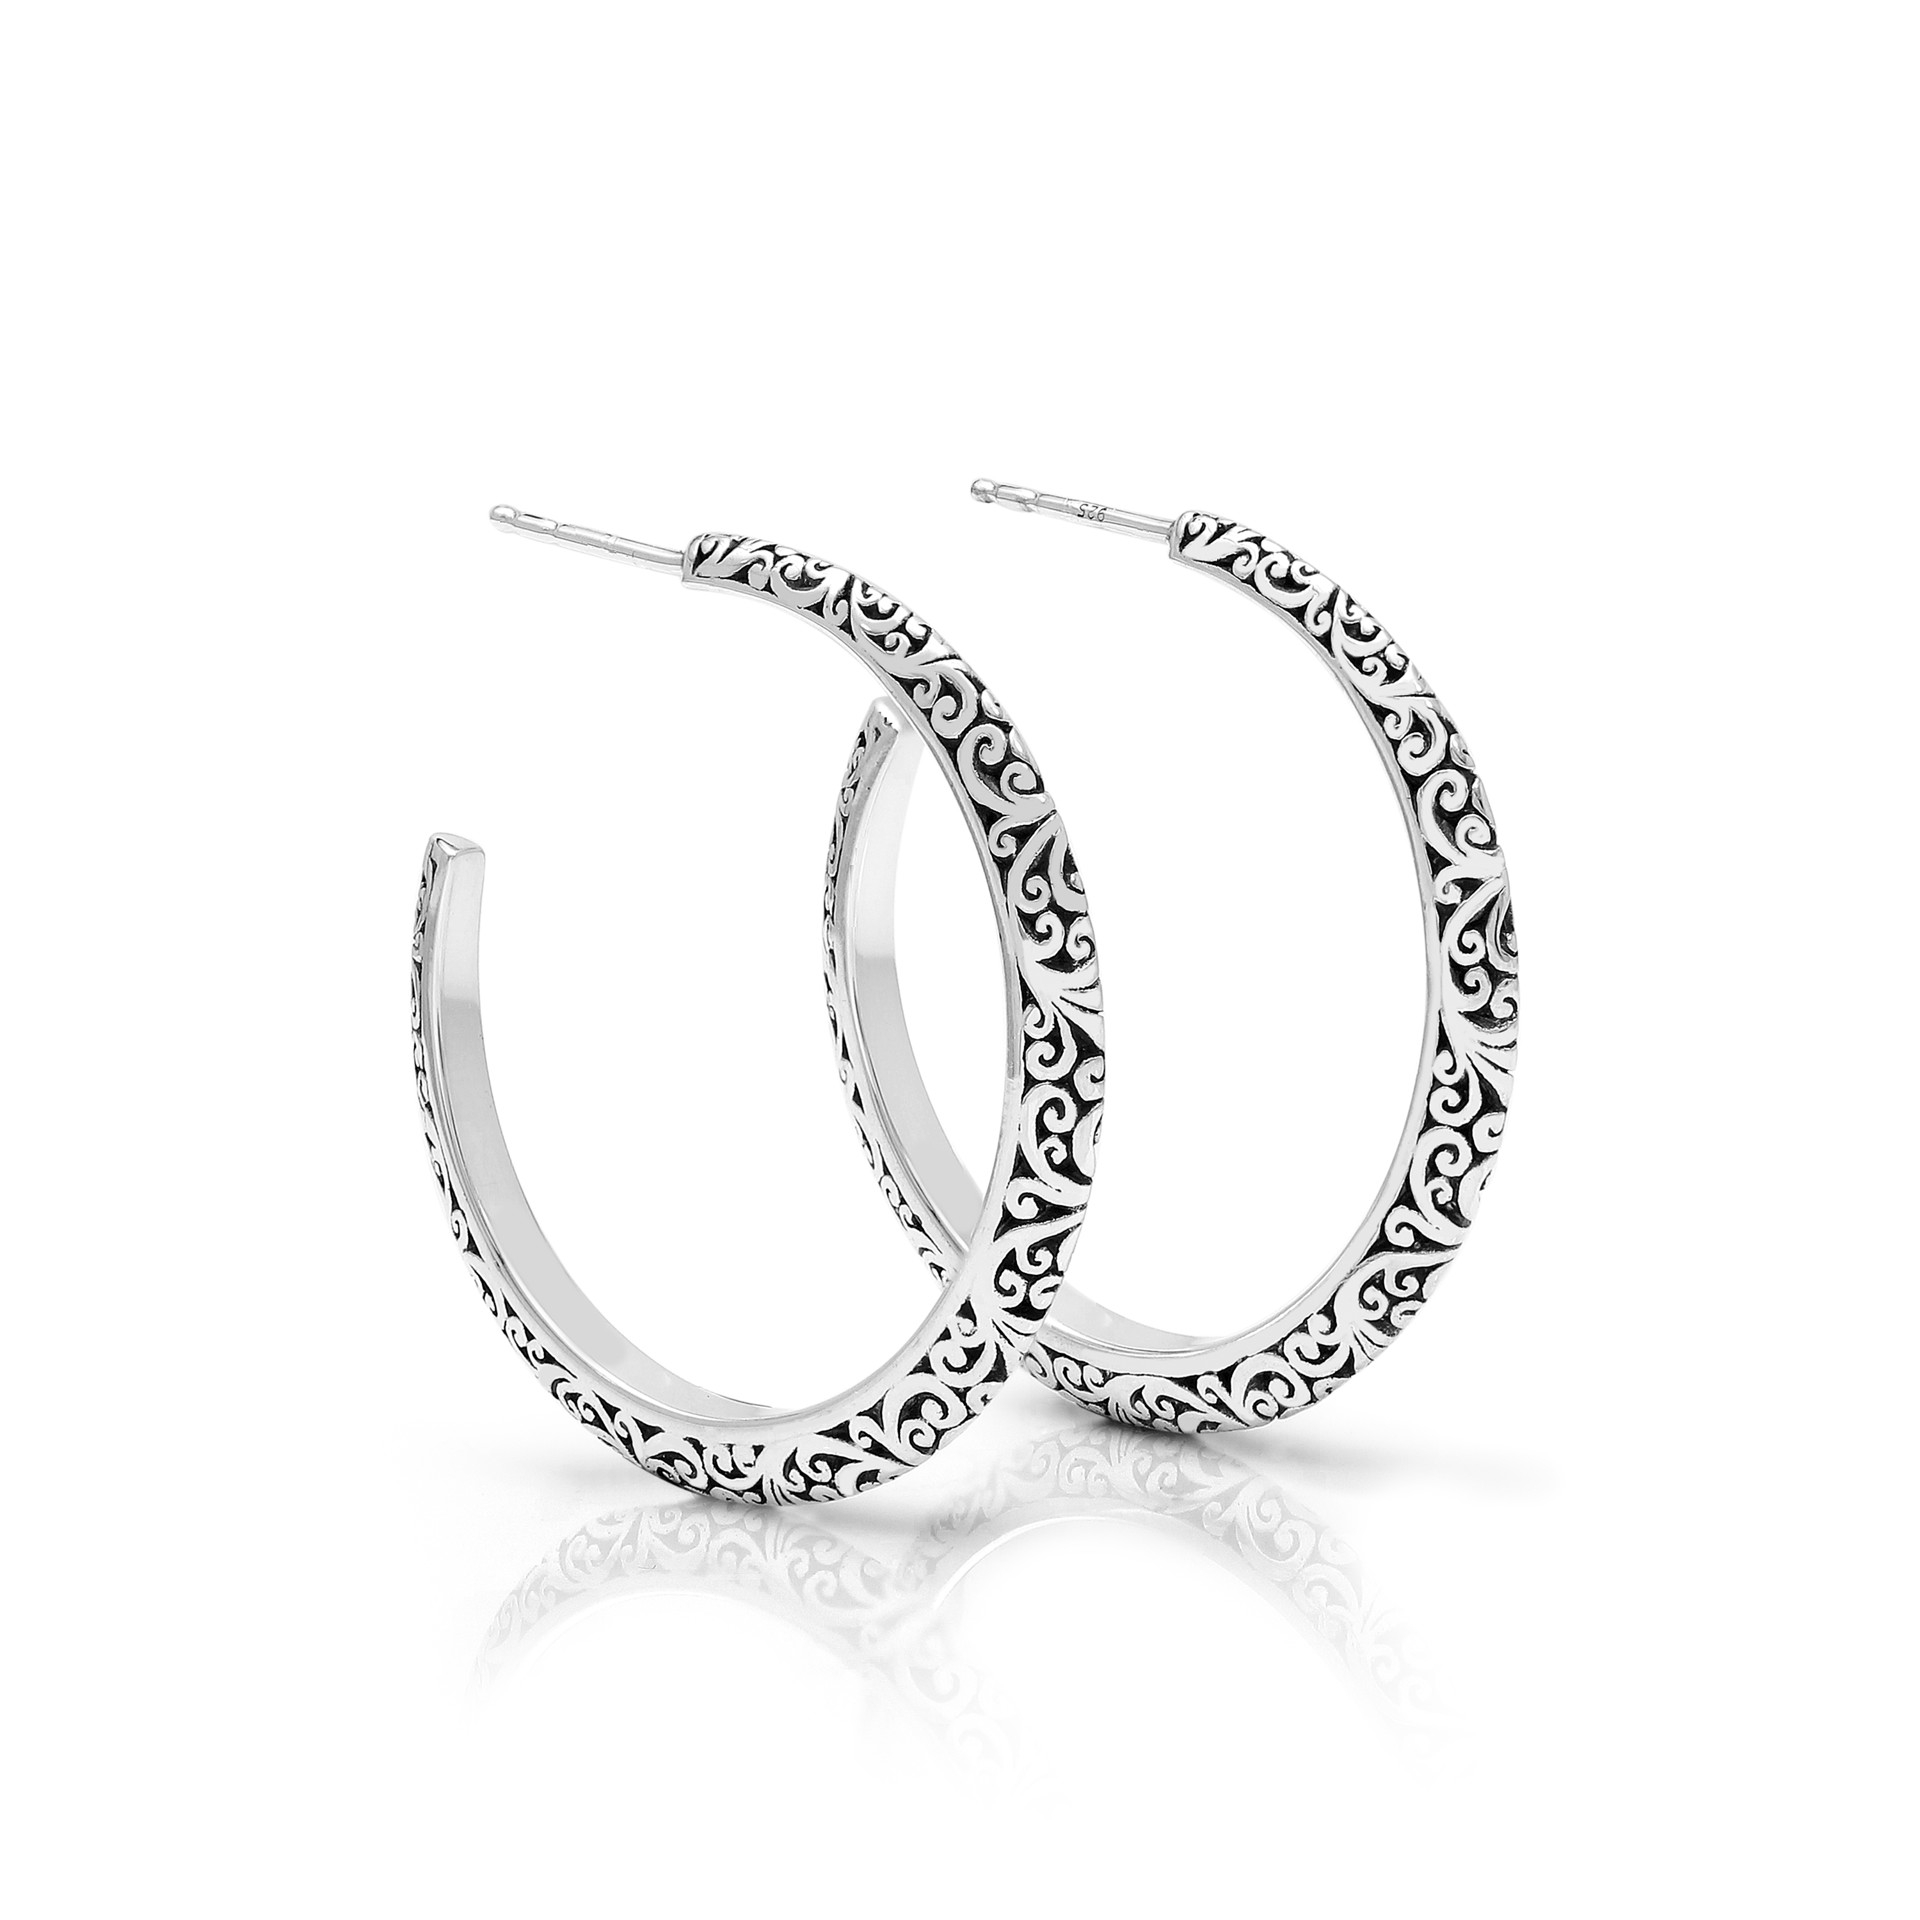 9324 Sterling Silver Hoops with Carvings by Lois Hill